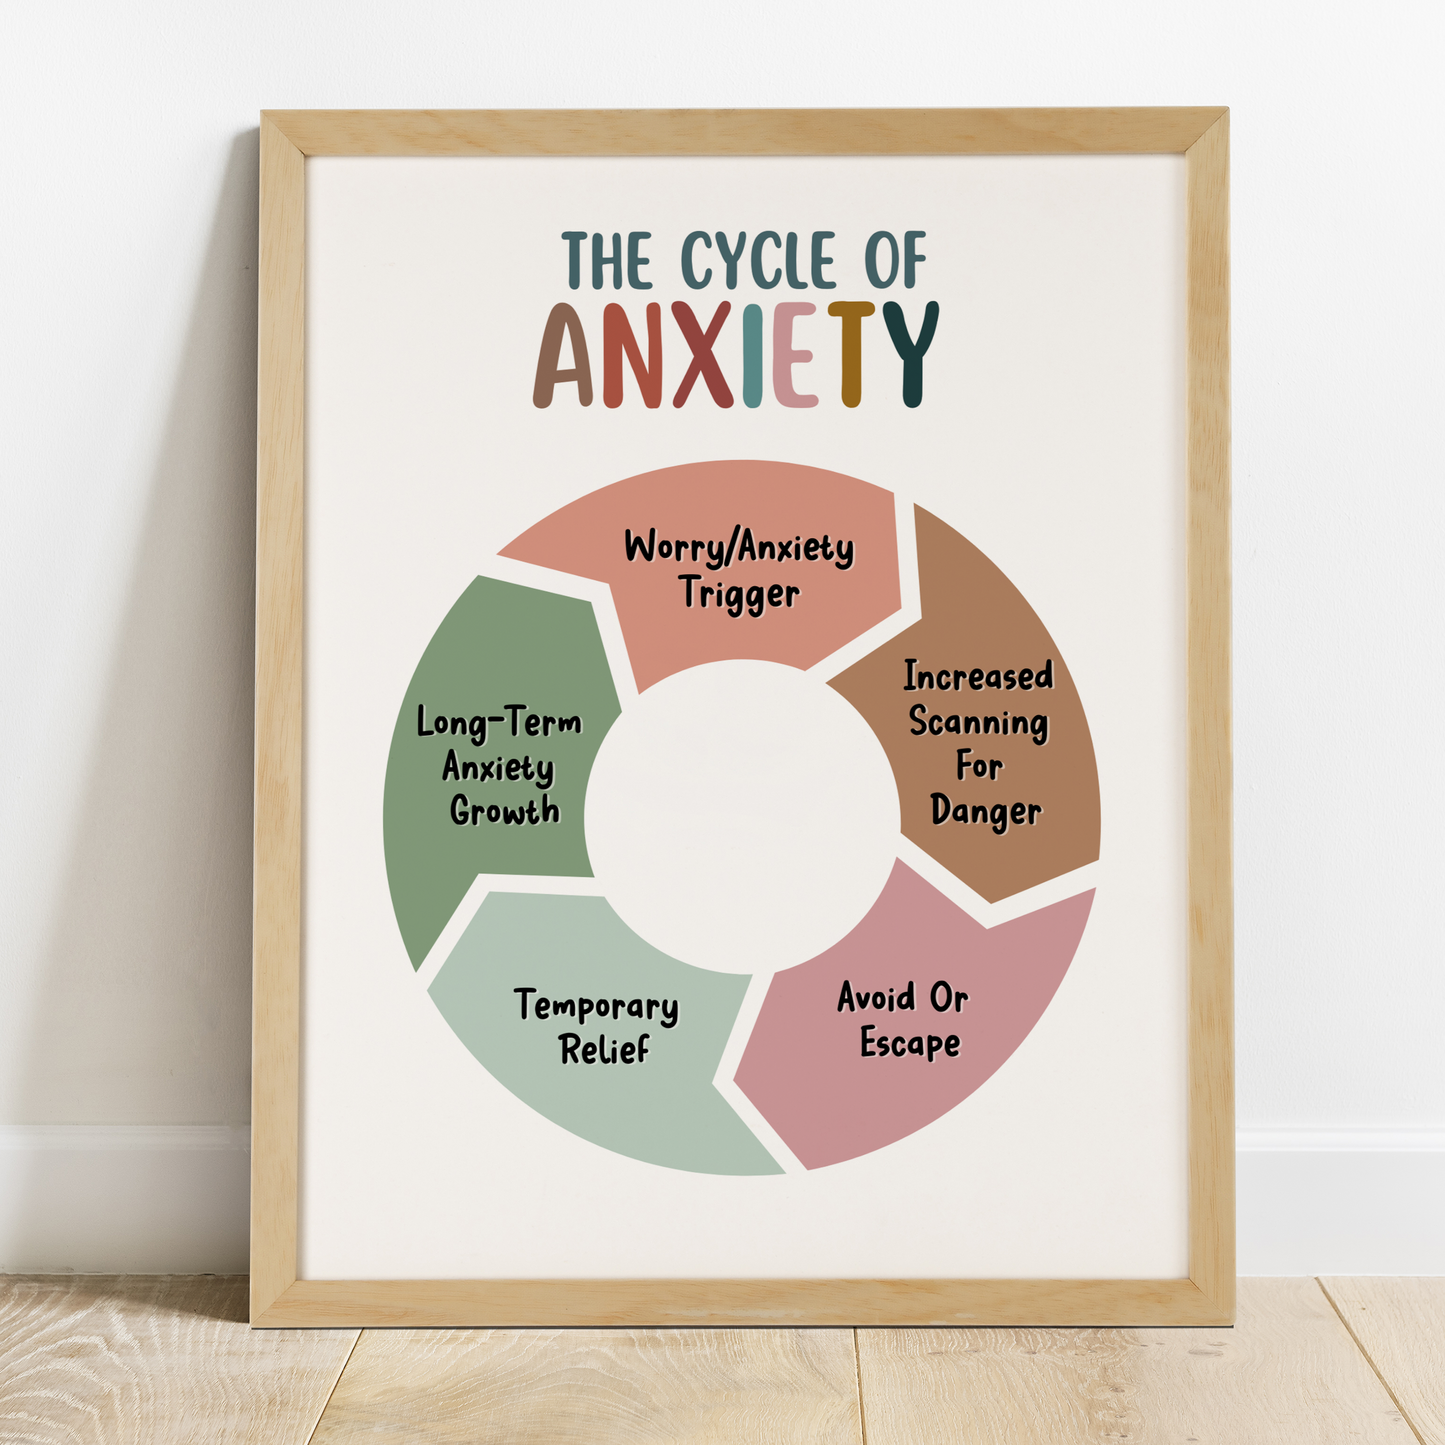 The Cycle of Anxiety